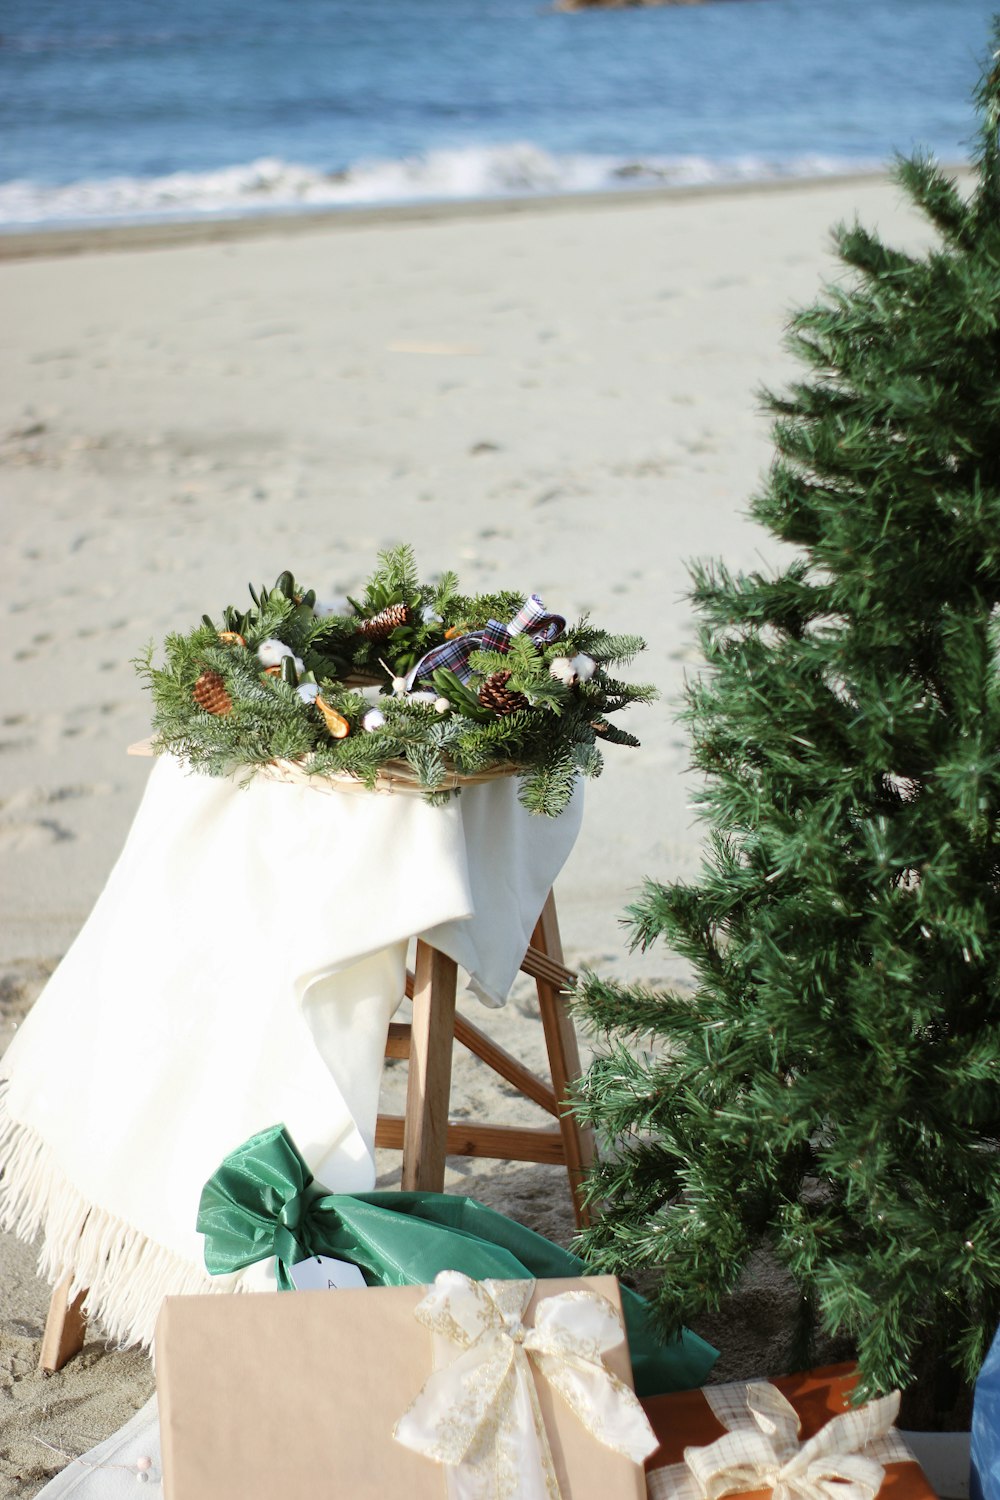 a christmas tree on the beach with presents under it